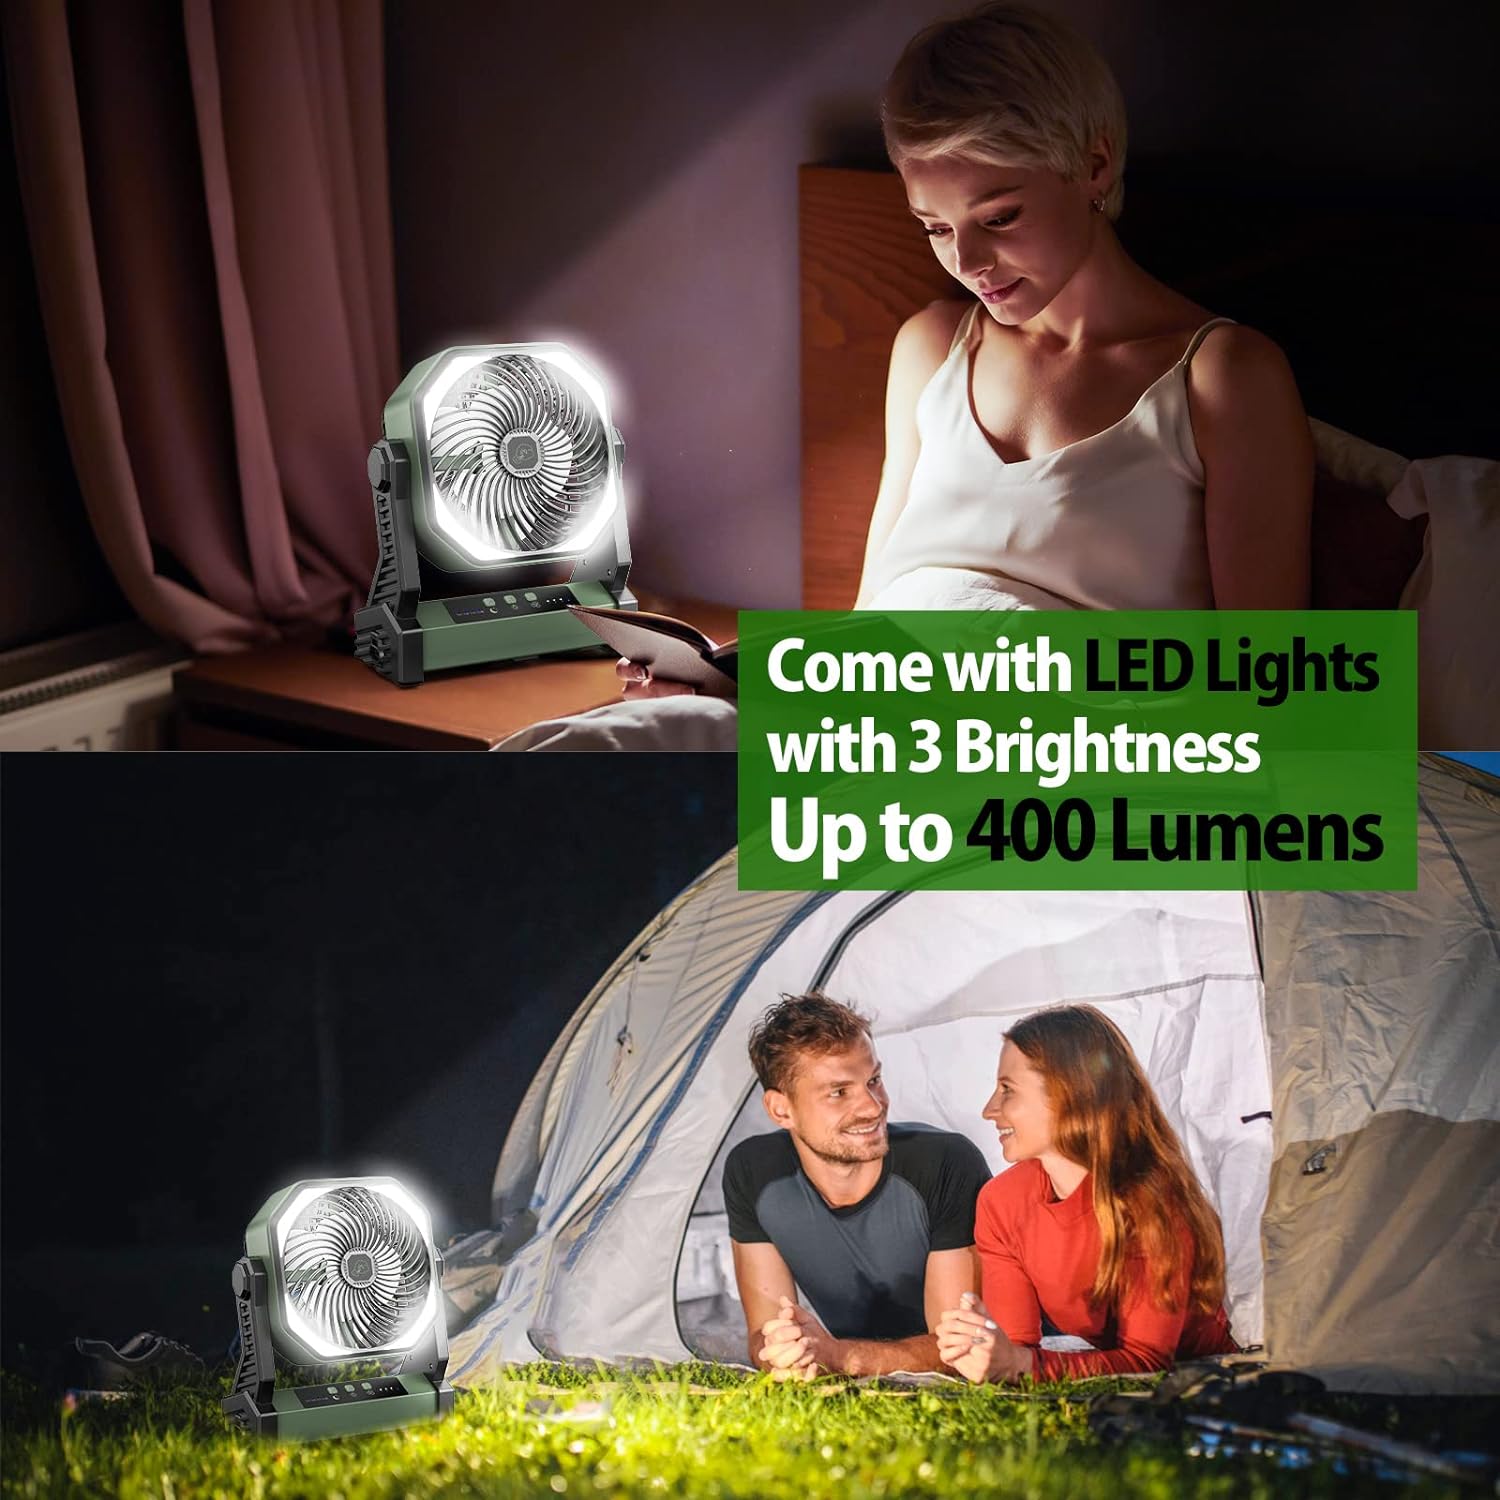 AMACOOL 20000mAh Camping Fan with LED Lantern, 8 inch Rechargeable Battery Operated USB Fan with Hook for Tent Car Travel Jobsite Fishing Outdoor Hurricane Power Outage